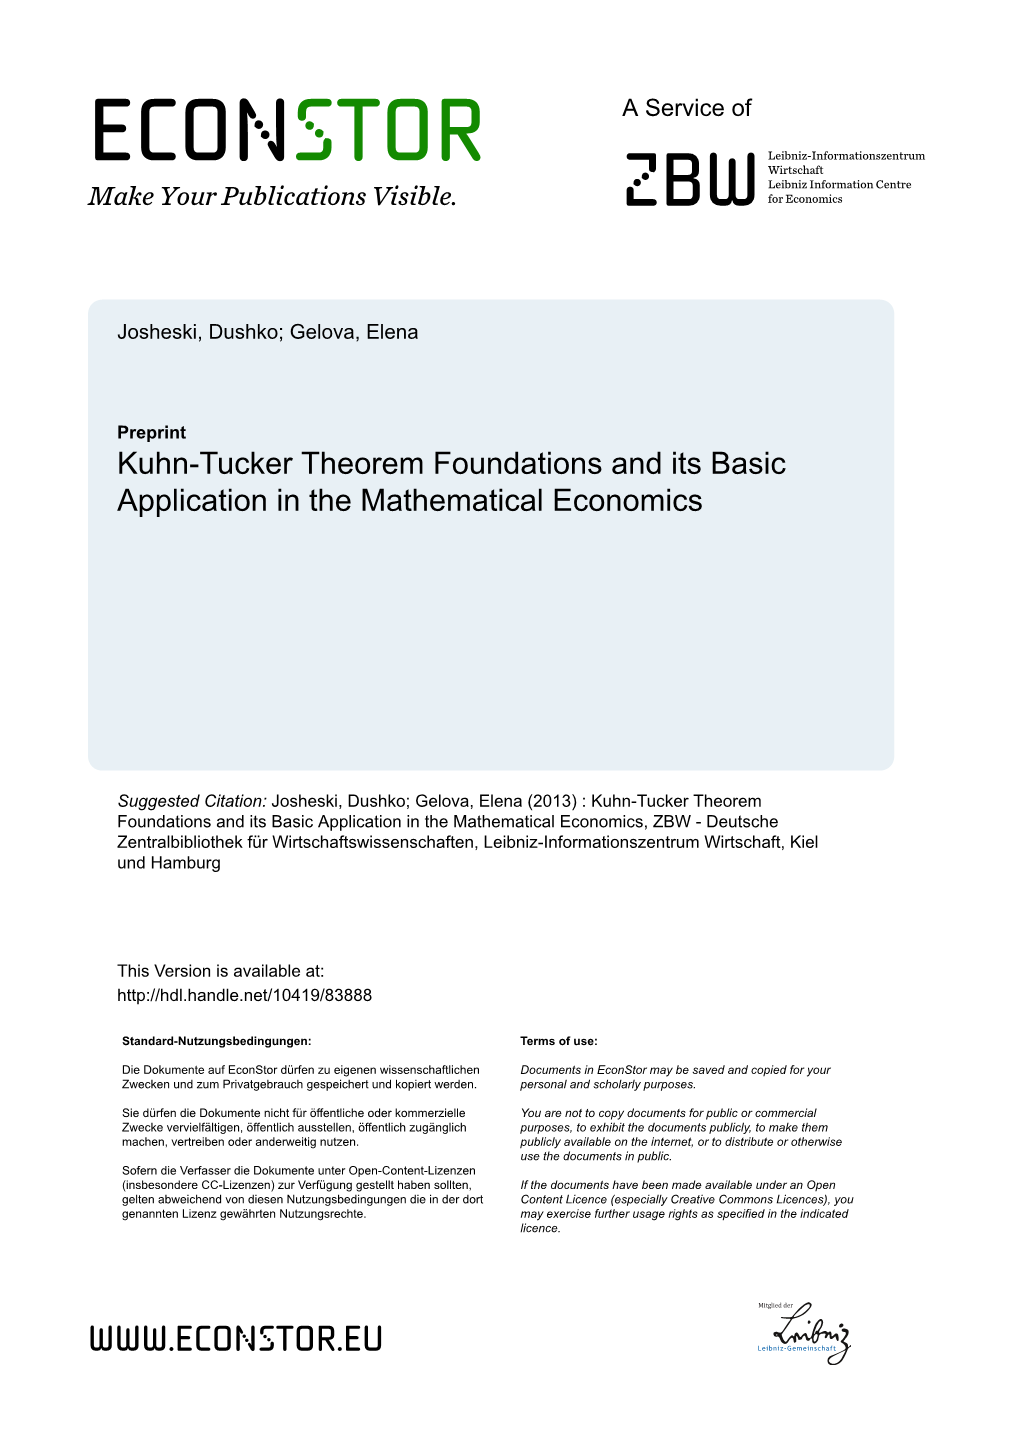 Kuhn-Tucker Theorem Foundations and Its Basic Application in the Mathematical Economics